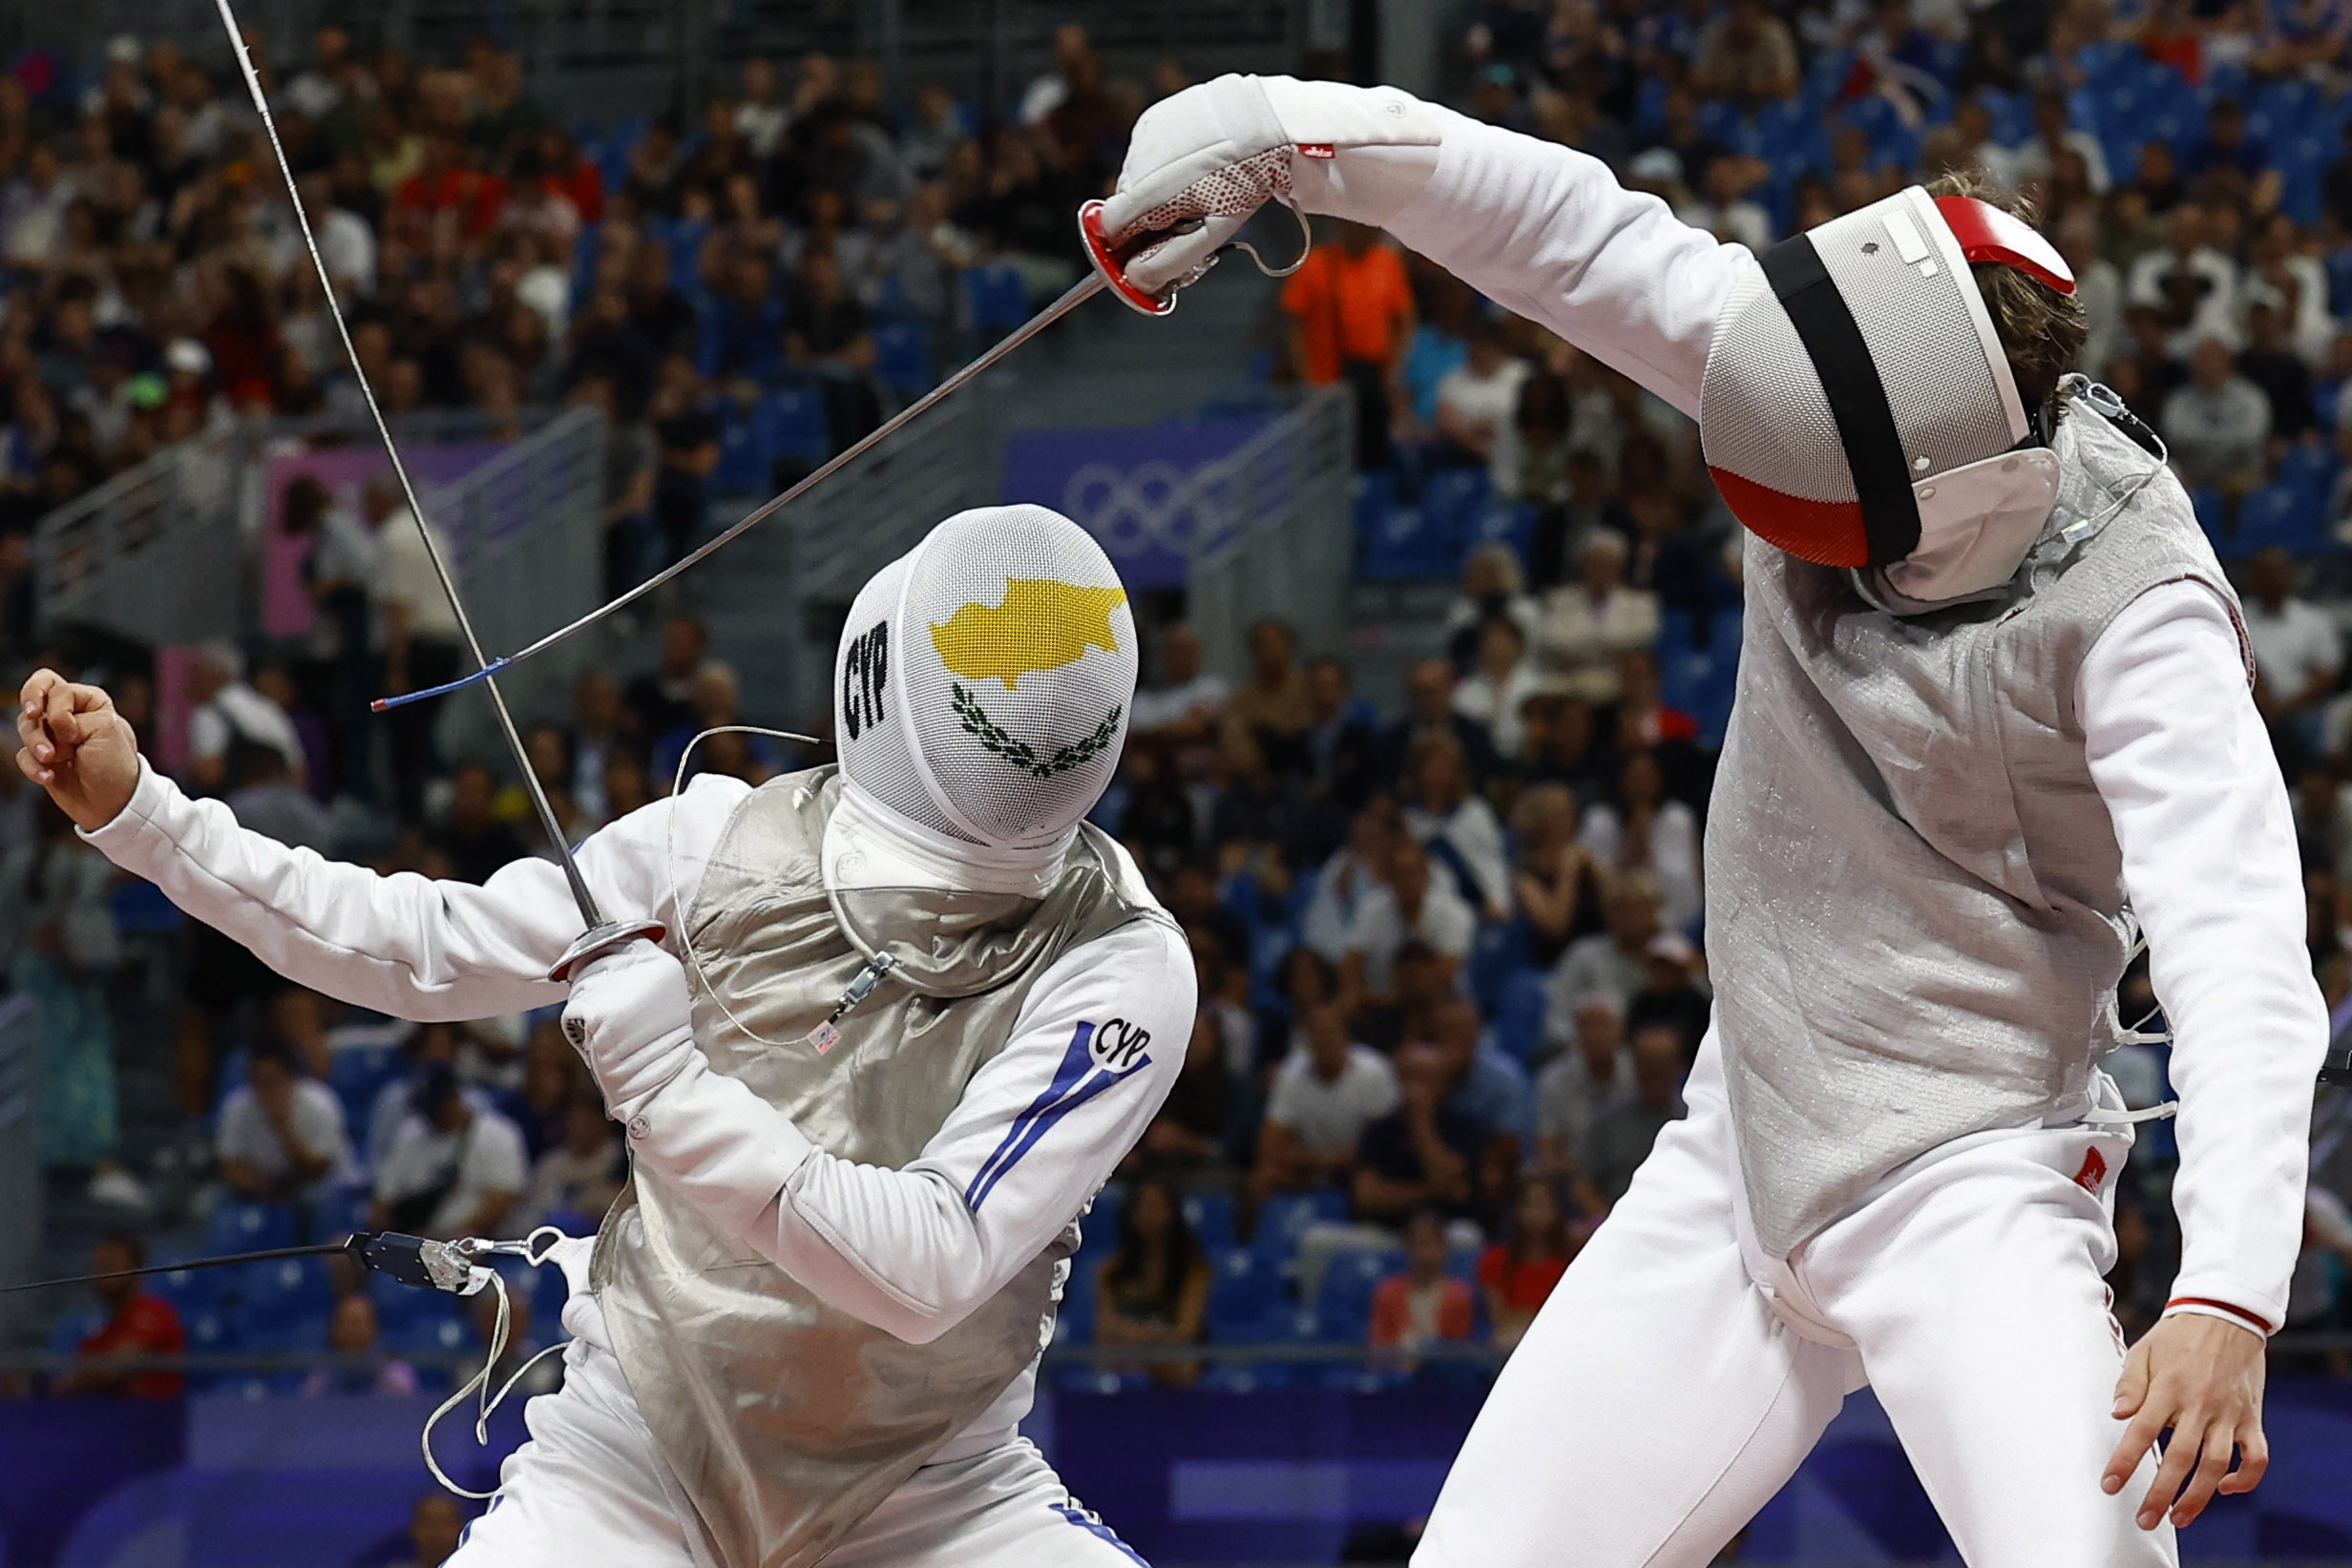 Cypriot Tofalidis through to last 32 of Olympic fencing